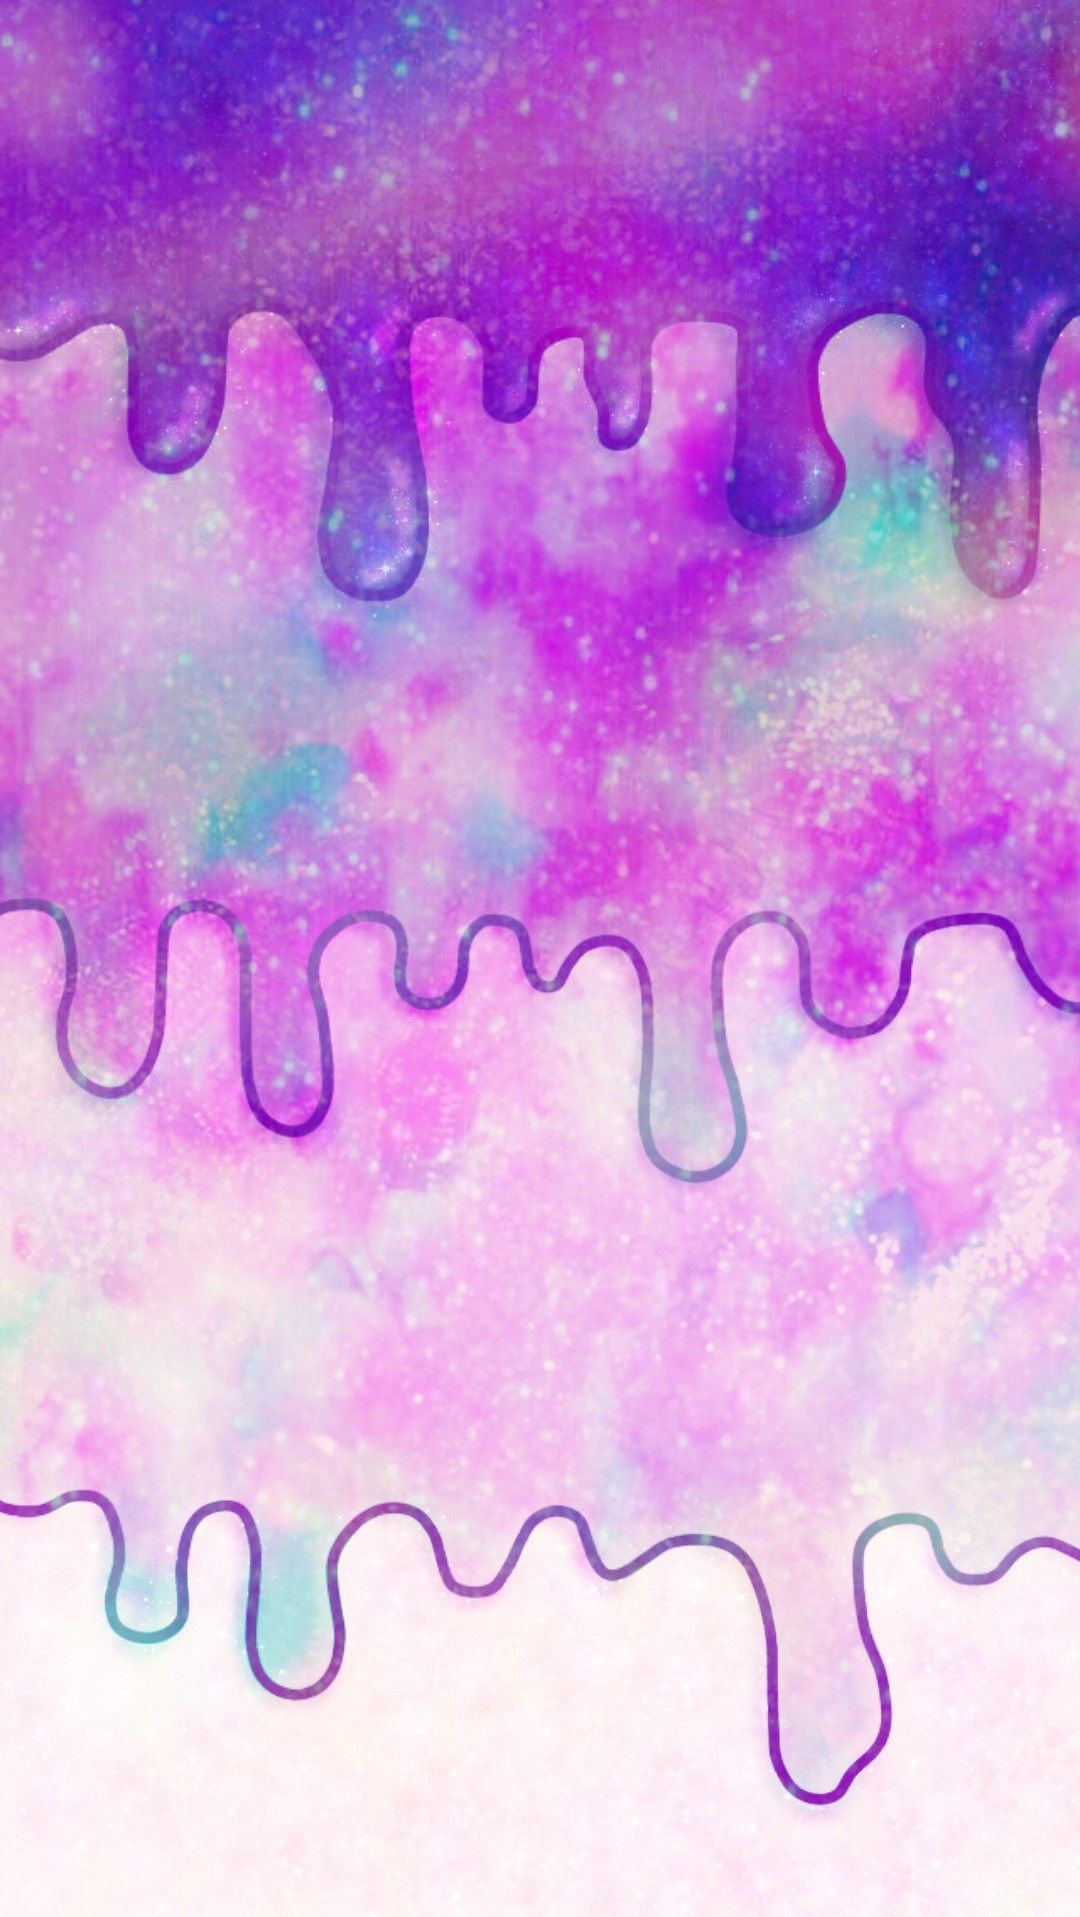 Galaxy Drips, made by me #purple #sparkly #wallpaper #background #sparkles #glittery #ga. Sparkle wallpaper, Rainbow abstract painting, Purple sparkly wallpaper